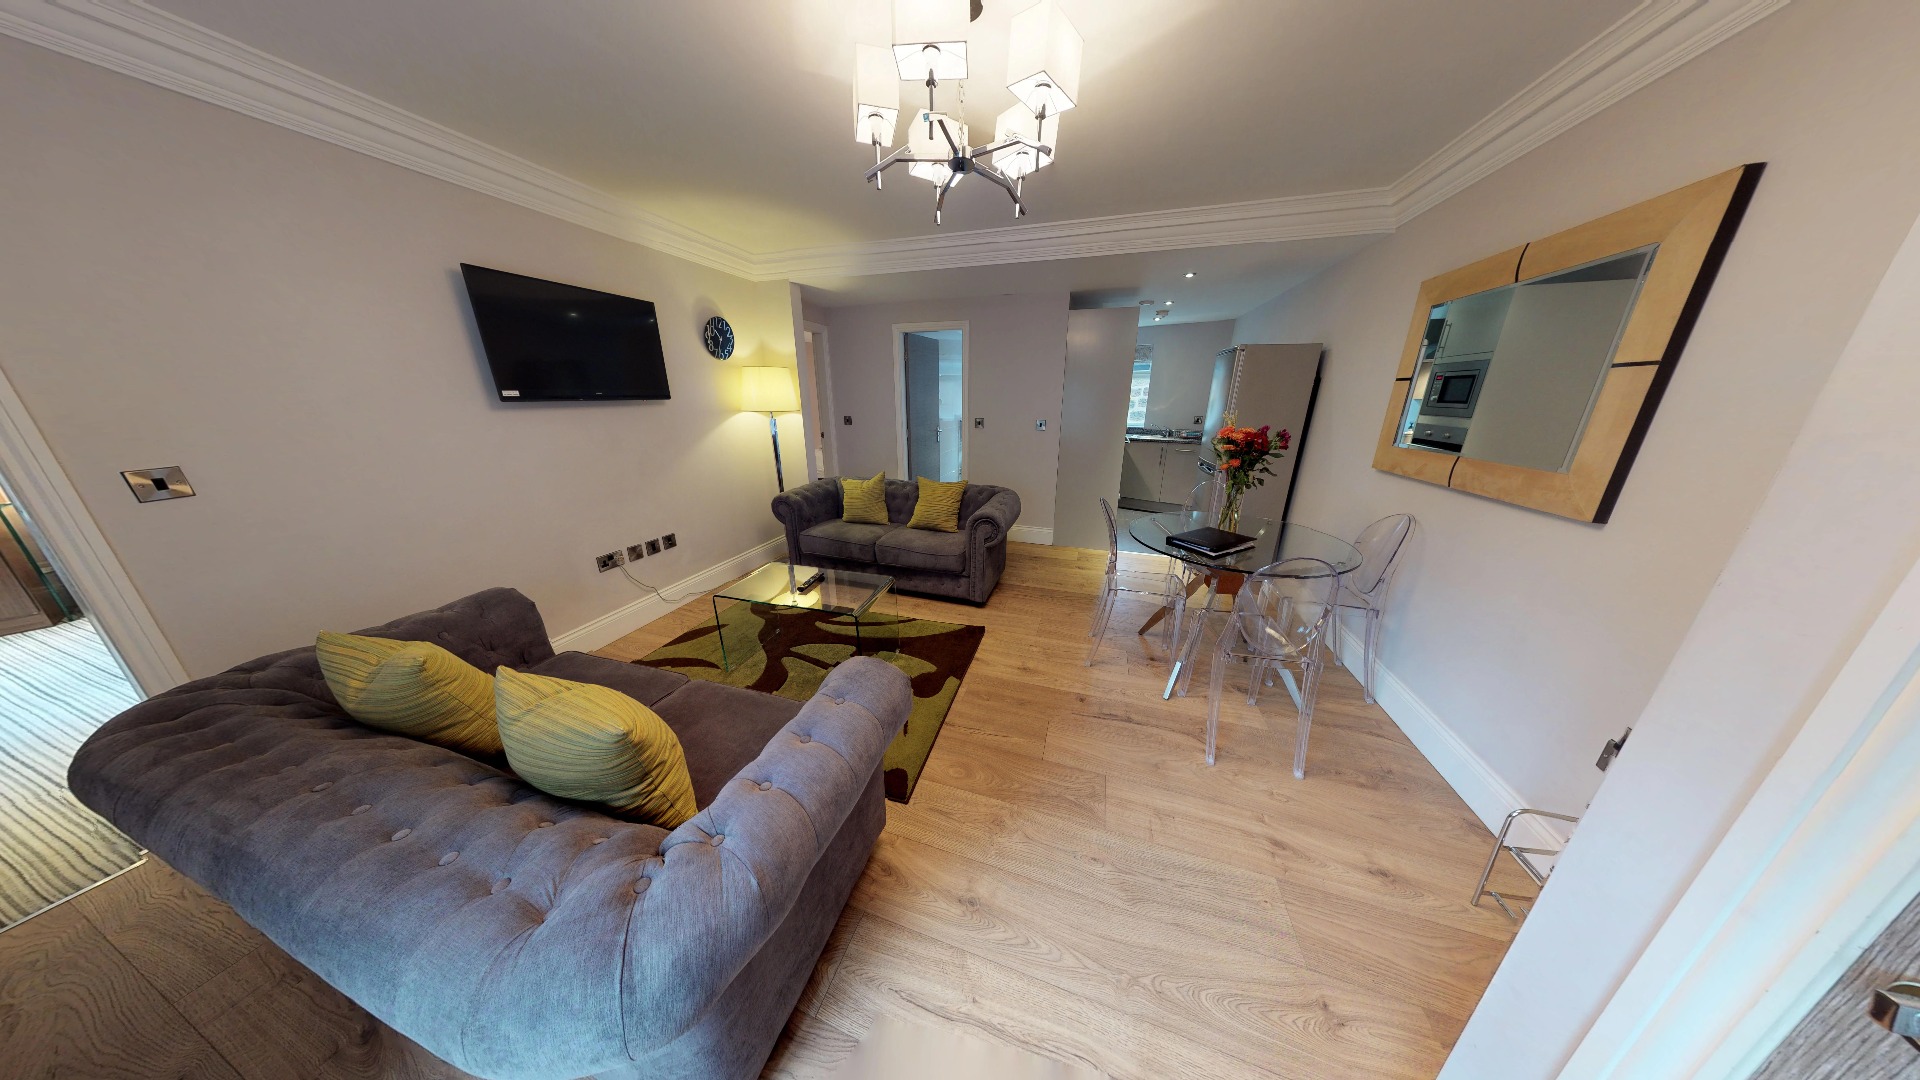 Harrogate Lifestyle Apartments Two bedroom one bathroom apartment to rent in Harrogate town centre Kings Road